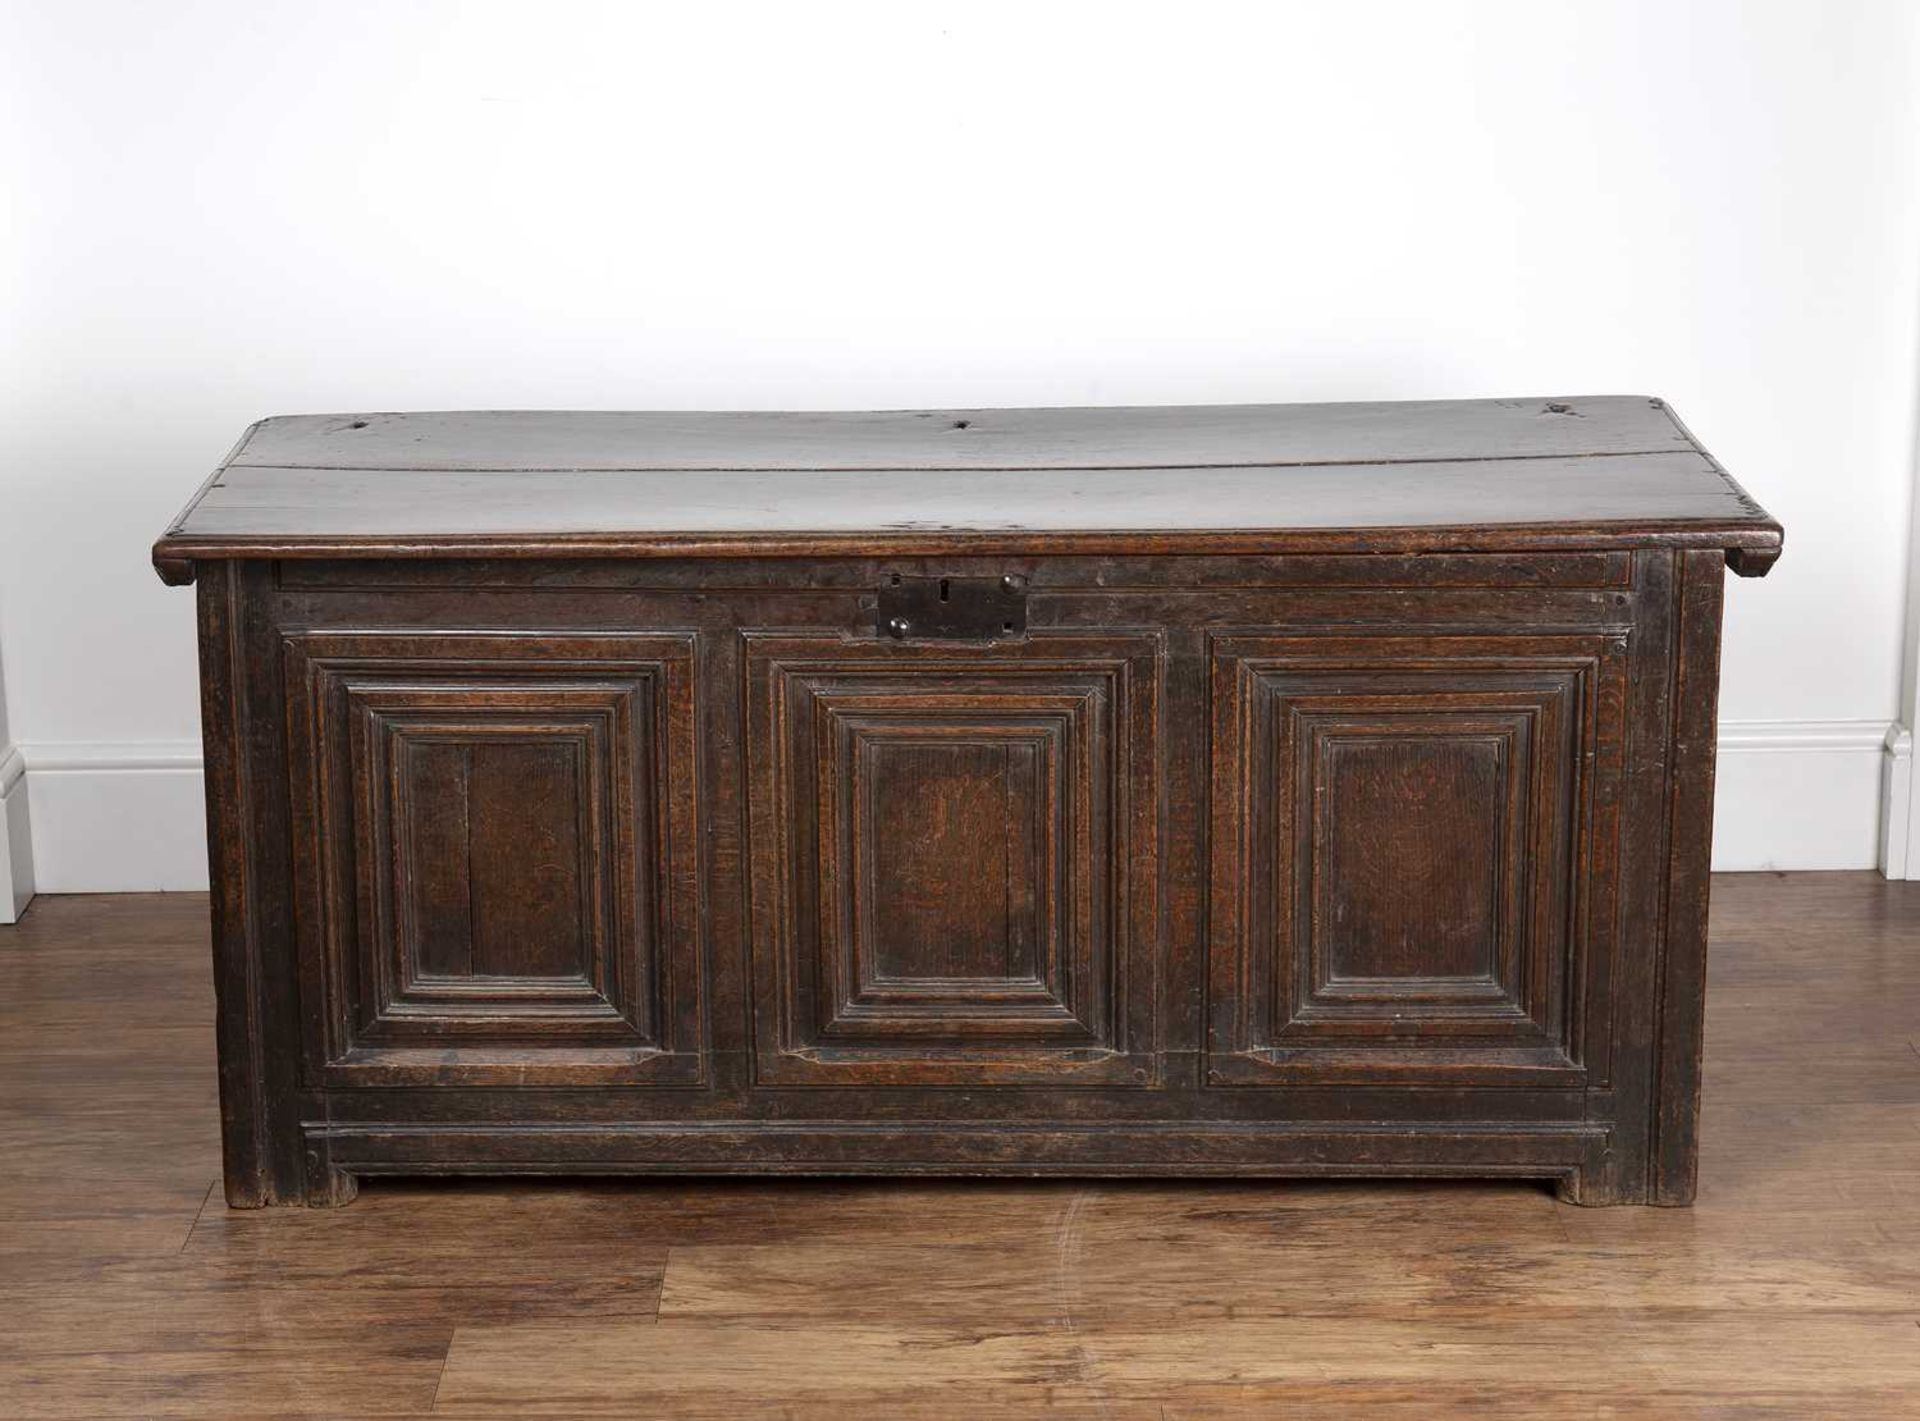 Oak moulded front coffer 17th Century, with three panels to the front and plain lift up top, 140cm x